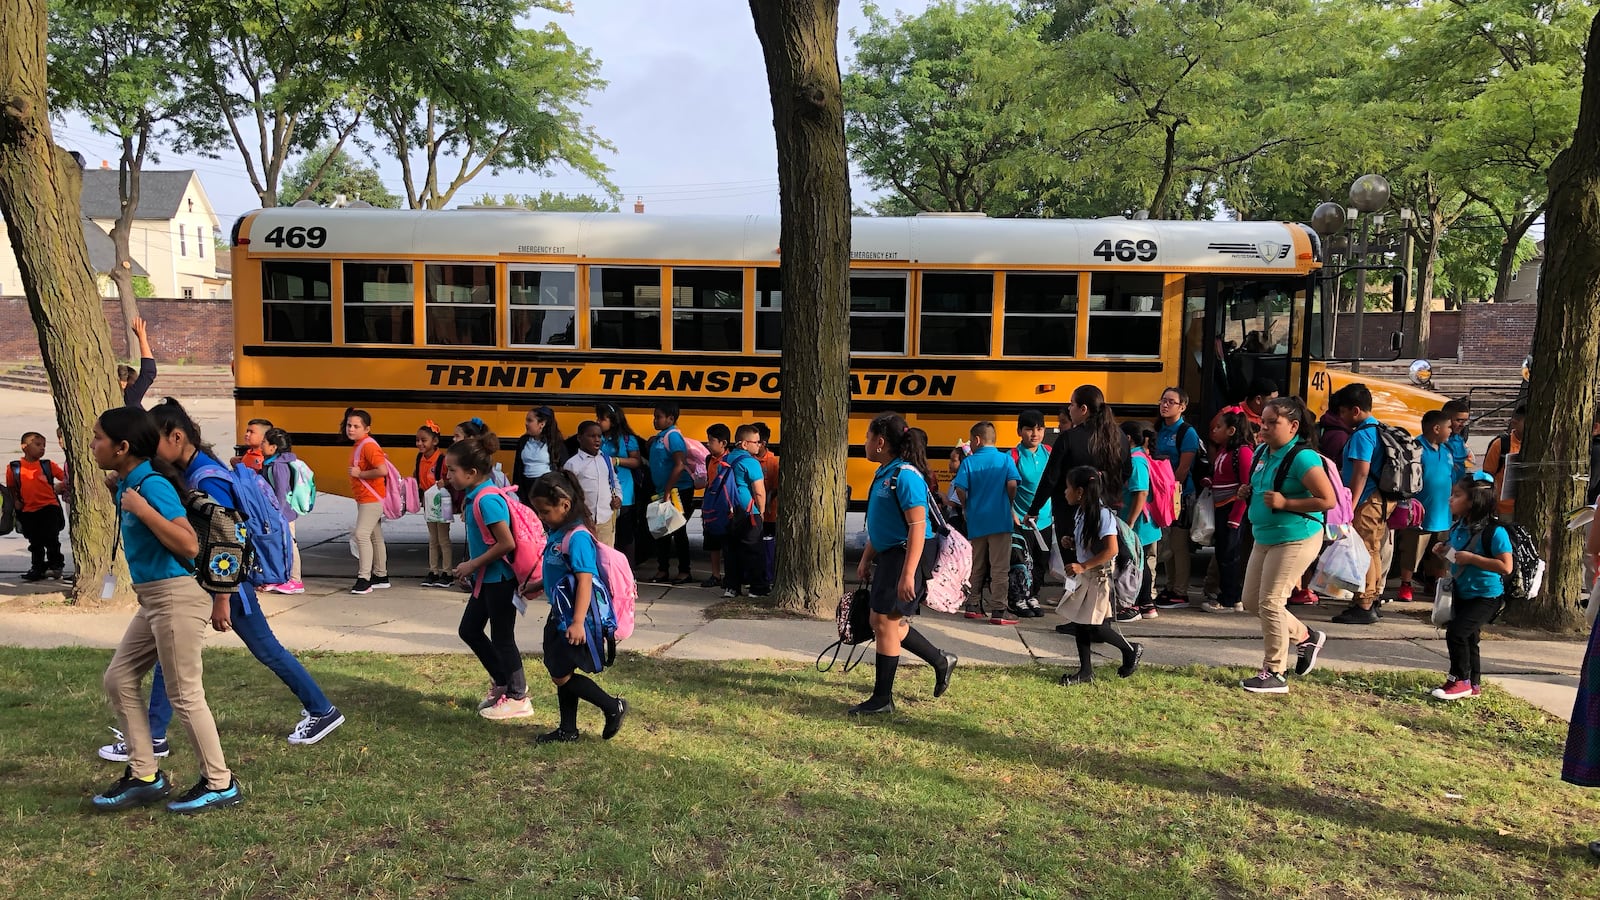 Students arrive at Escuela Avancemos, a Detroit charter school, on the first day of school in 2019.